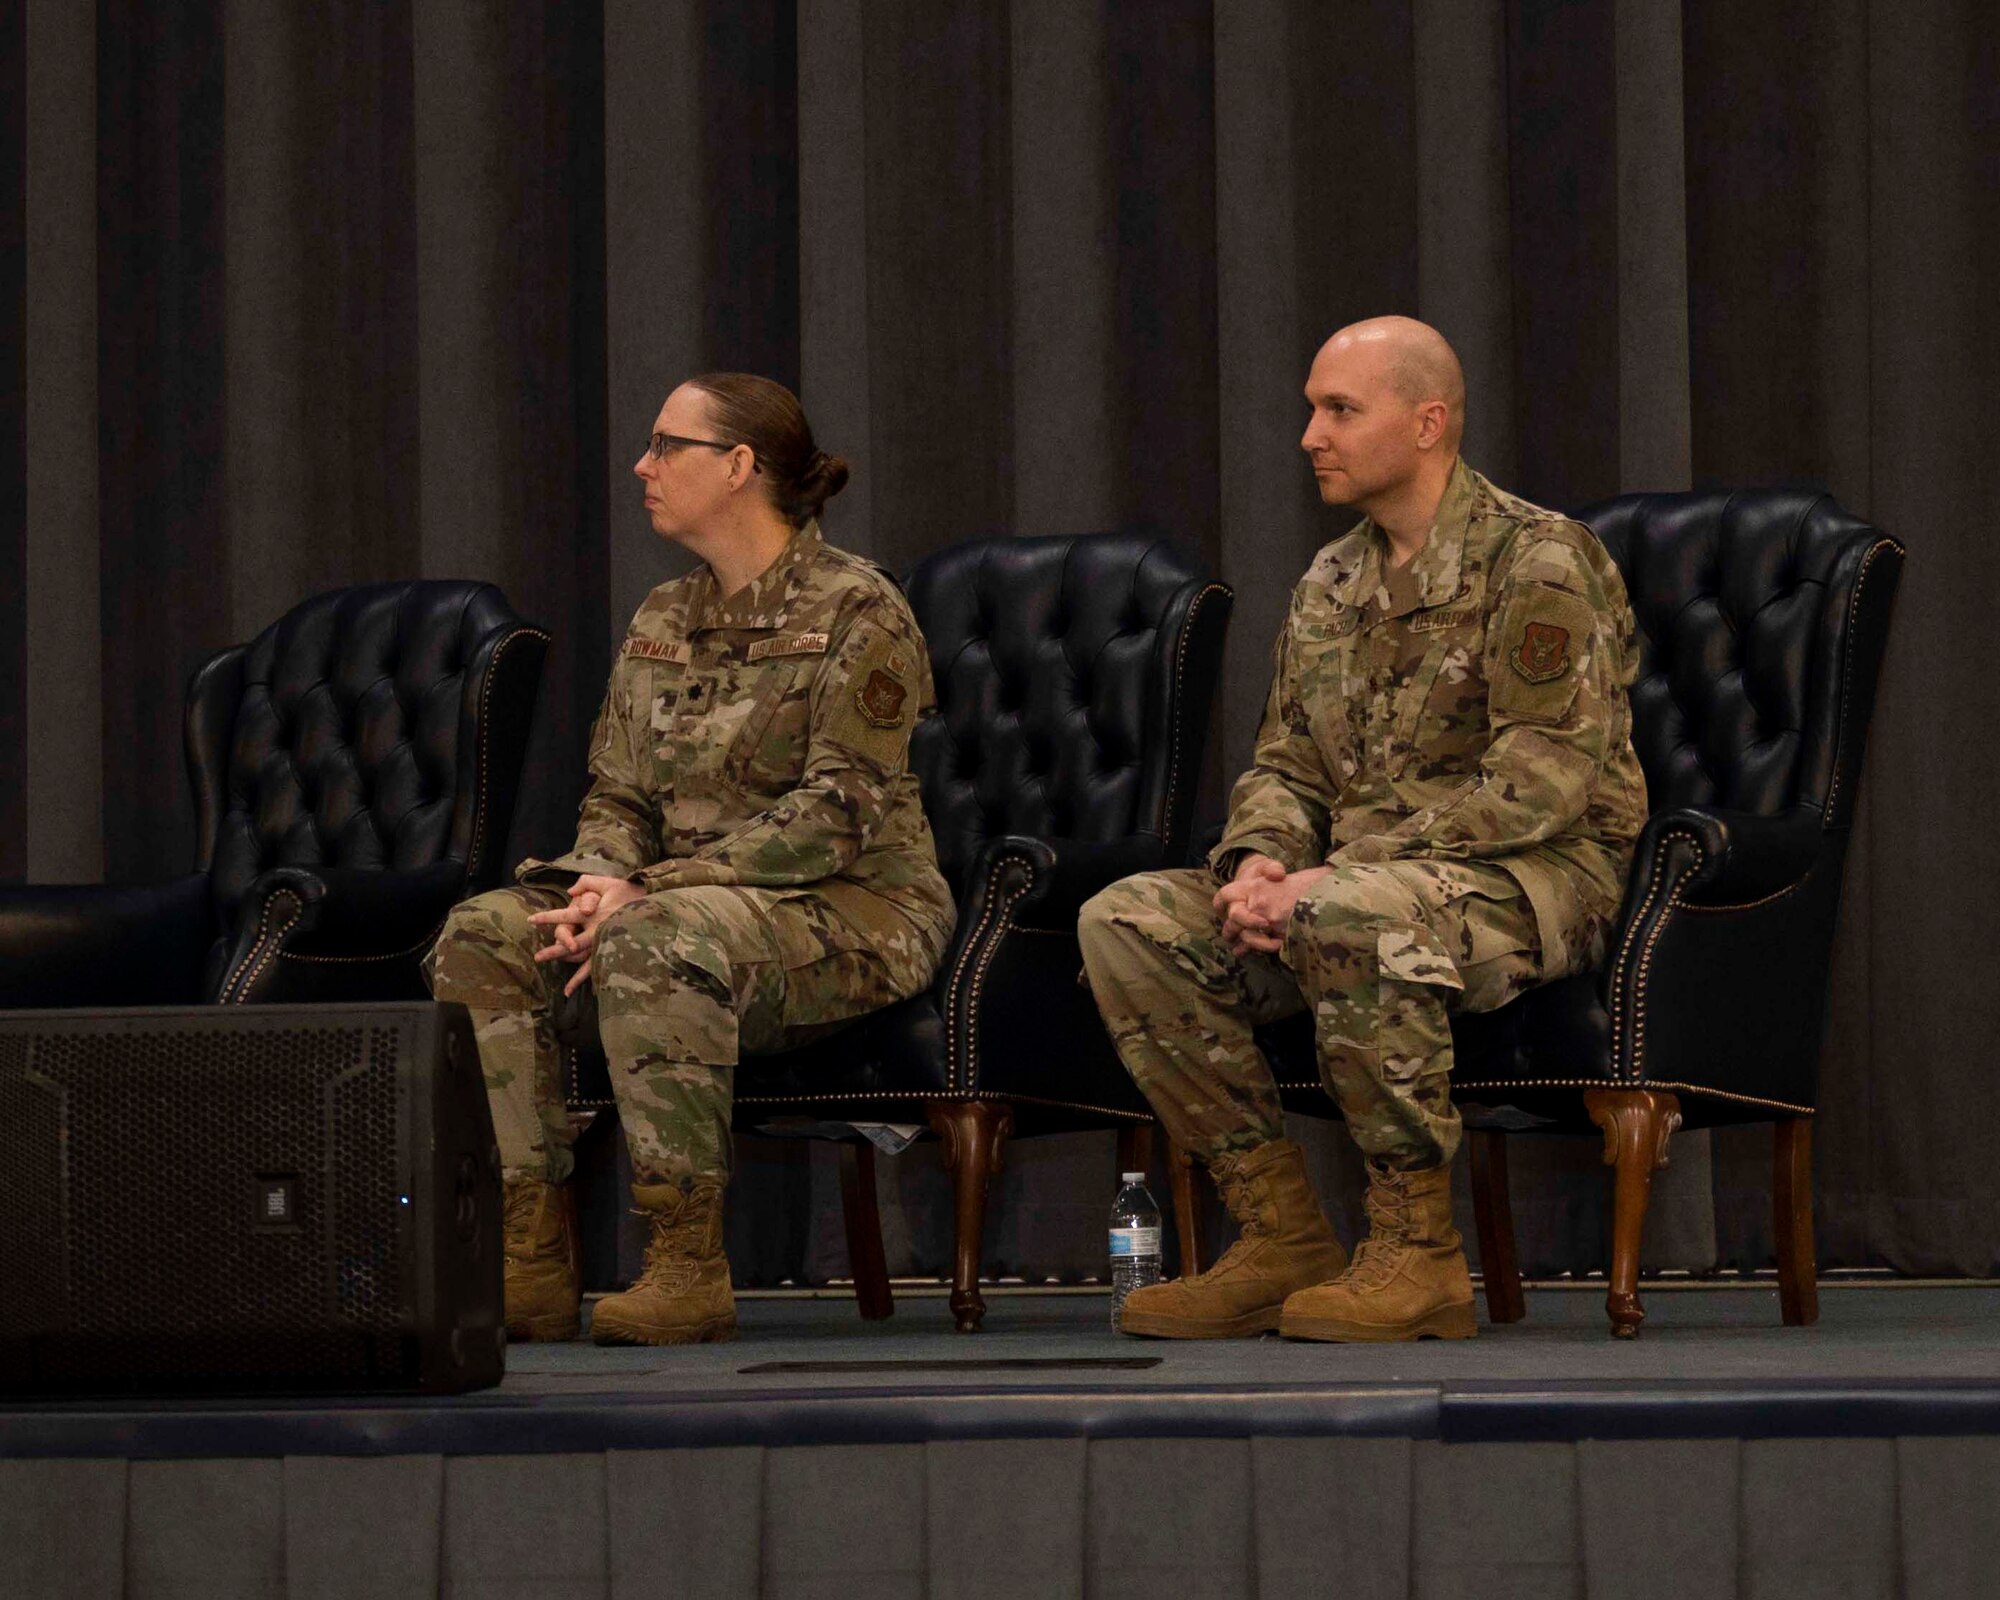 Photo of Airman sitting in chairs on stage